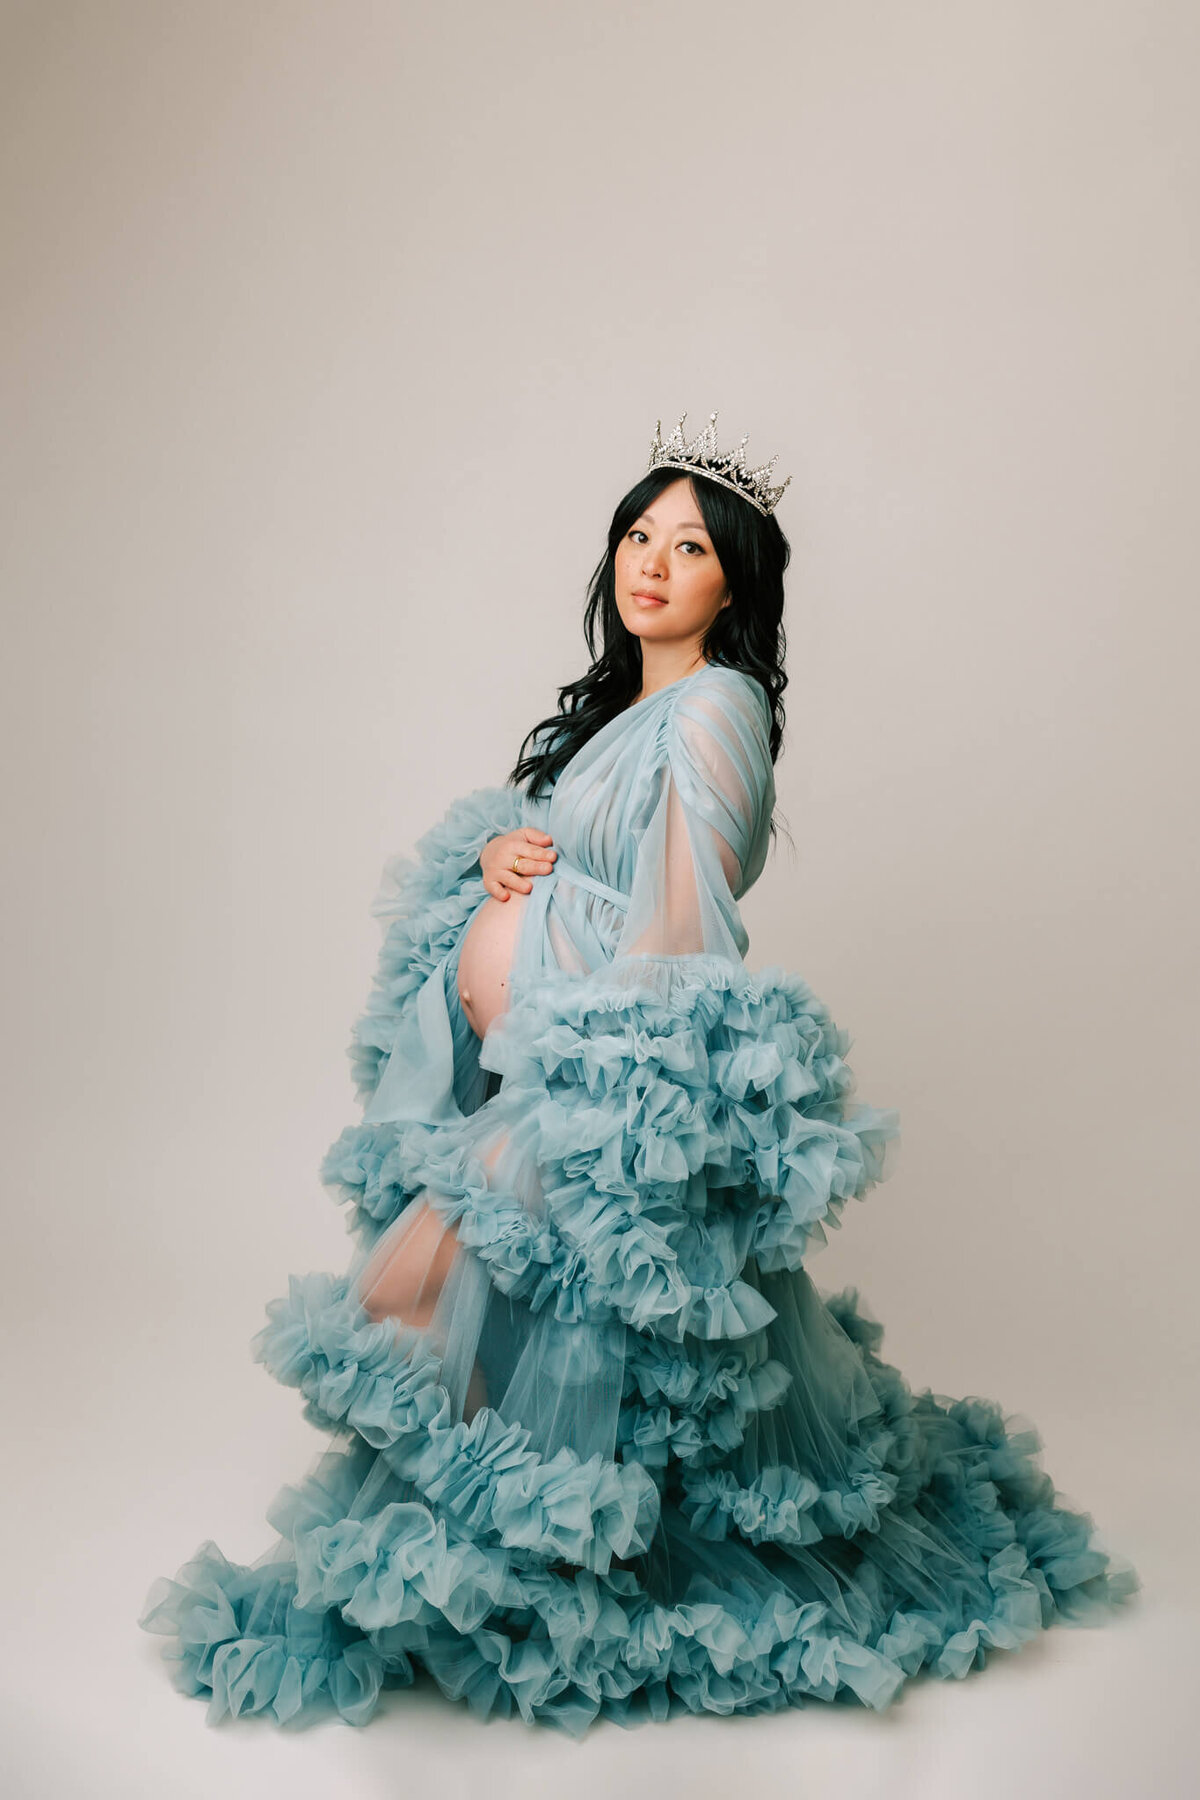 fine art maternity portrait of a mom wearing a blue tulle dress and crown. She is looking at the camera